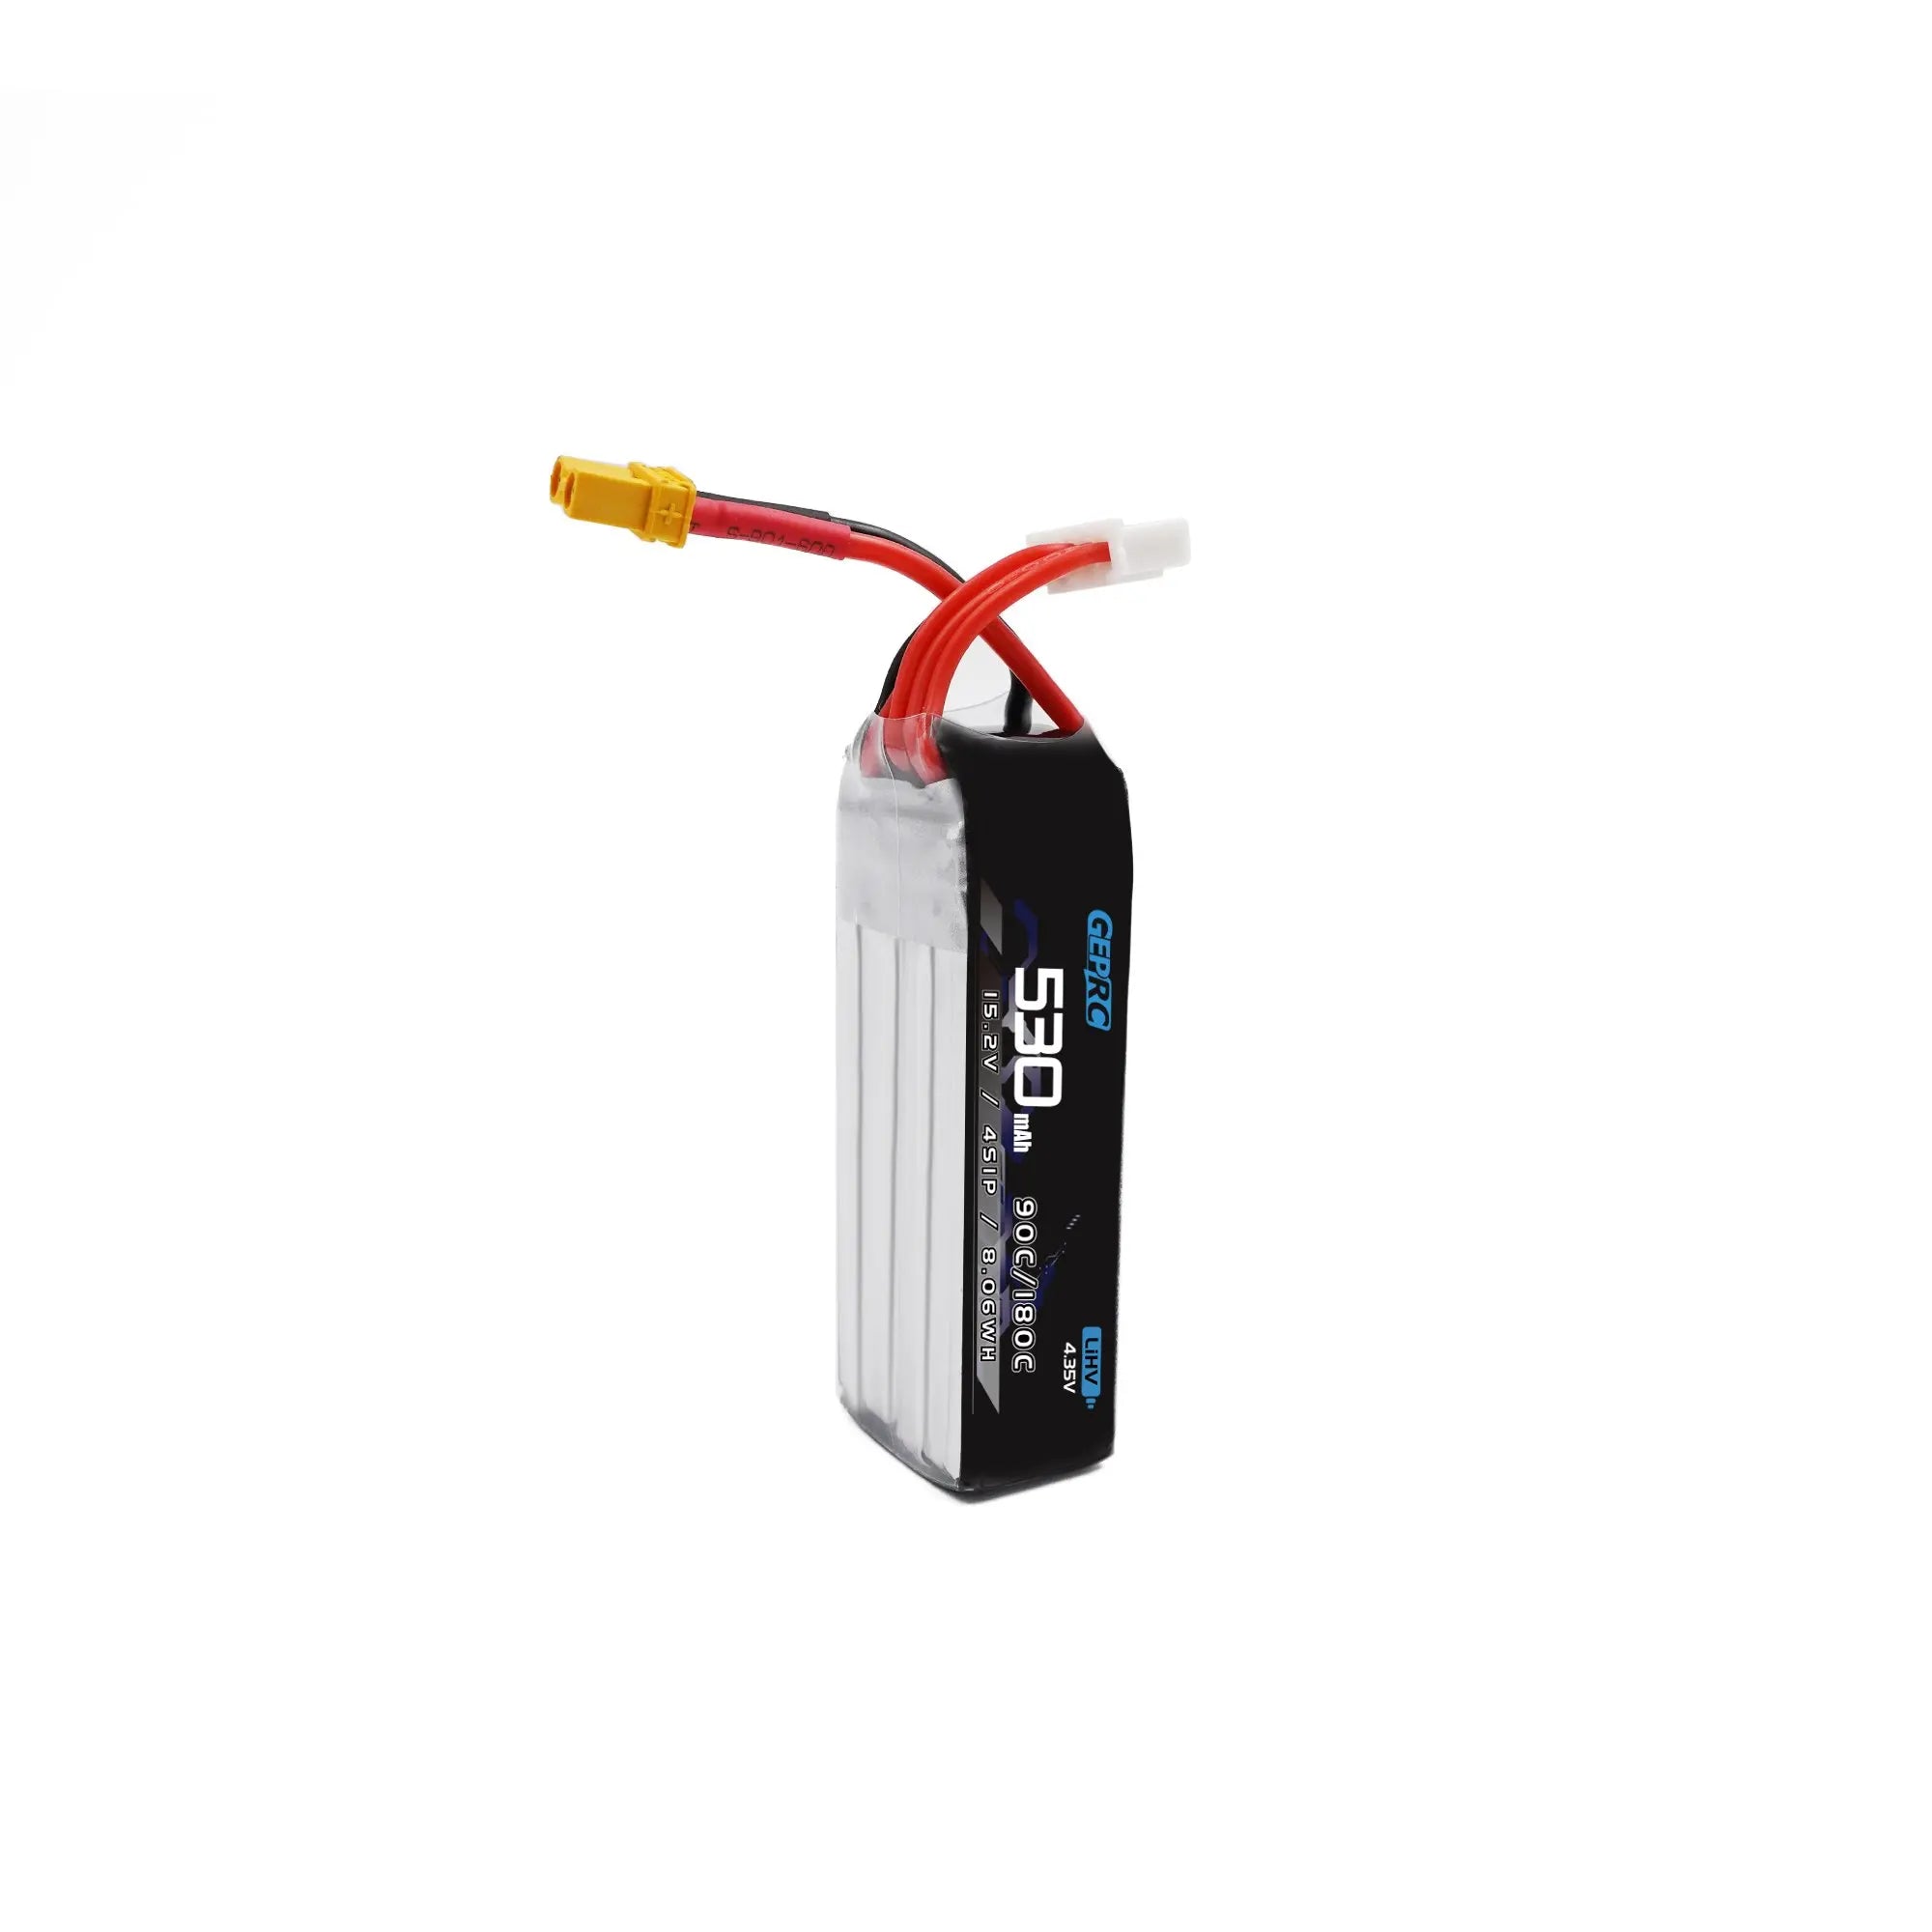 GEPRC 4S 530mAh LiPo Battery, higher discharge rate can make your drone more powerful